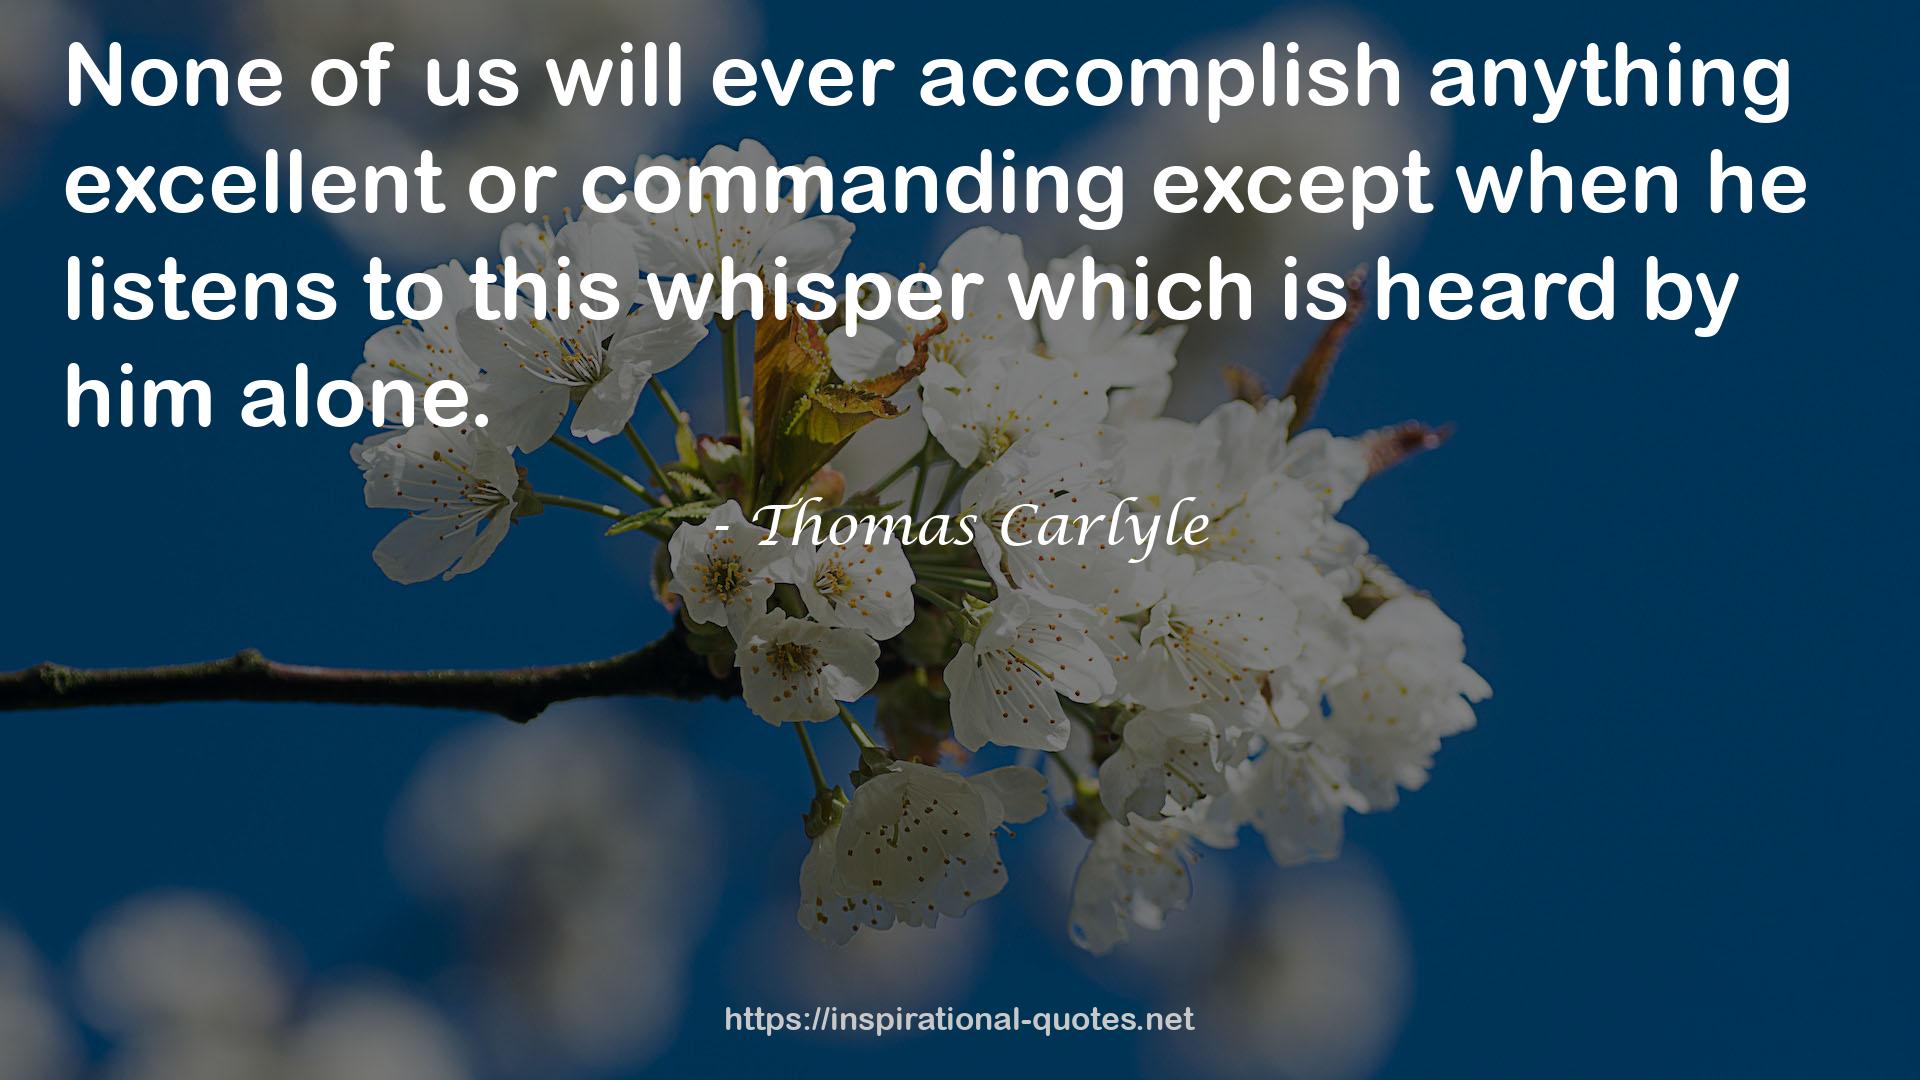 Thomas Carlyle QUOTES